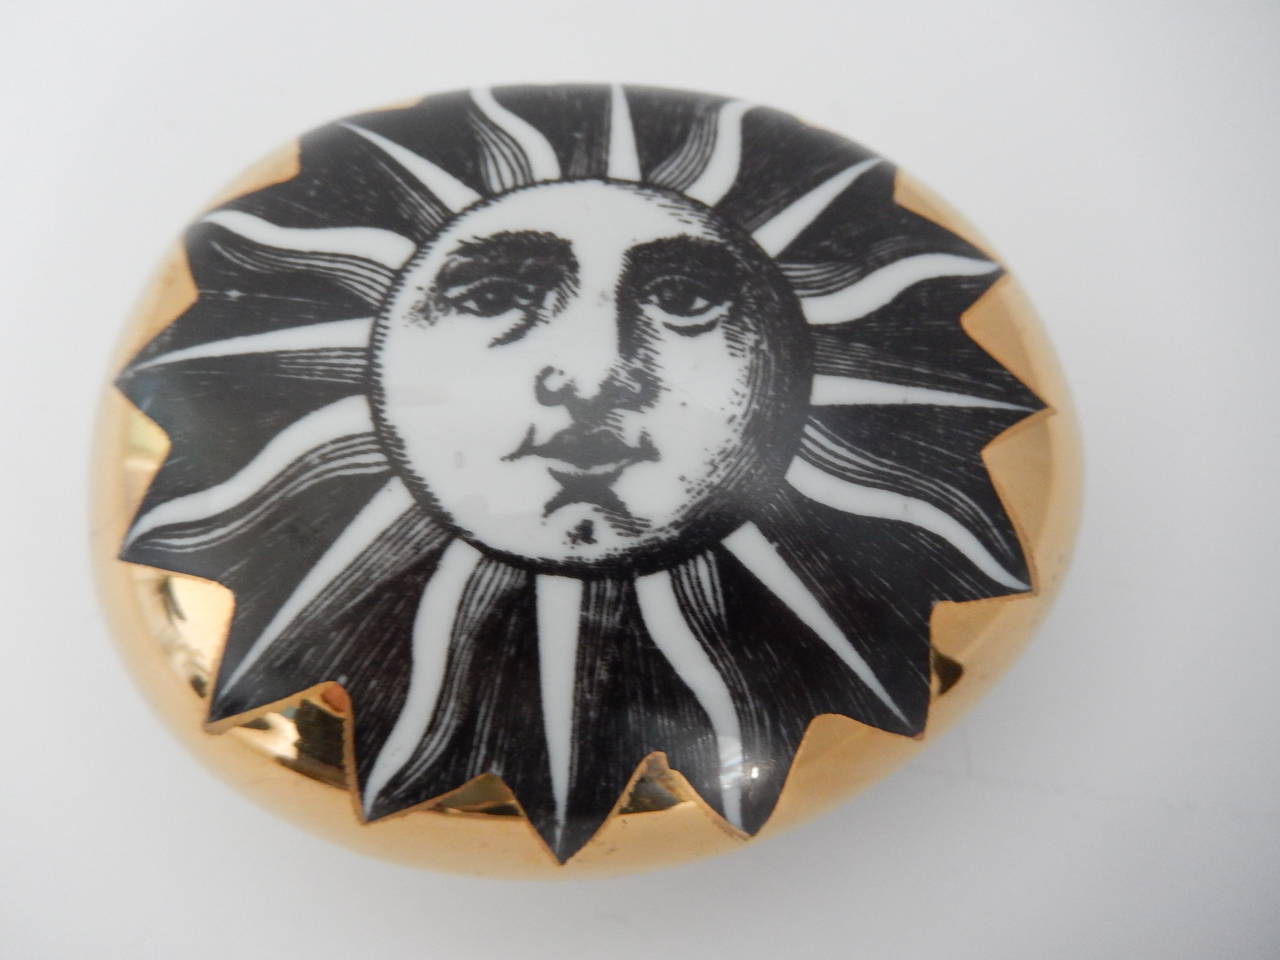 A gilded ceramic paperweight by Piero Fornasetti with a bold sun design.
An early example of his iconic sun image in excellent condition. Marked.